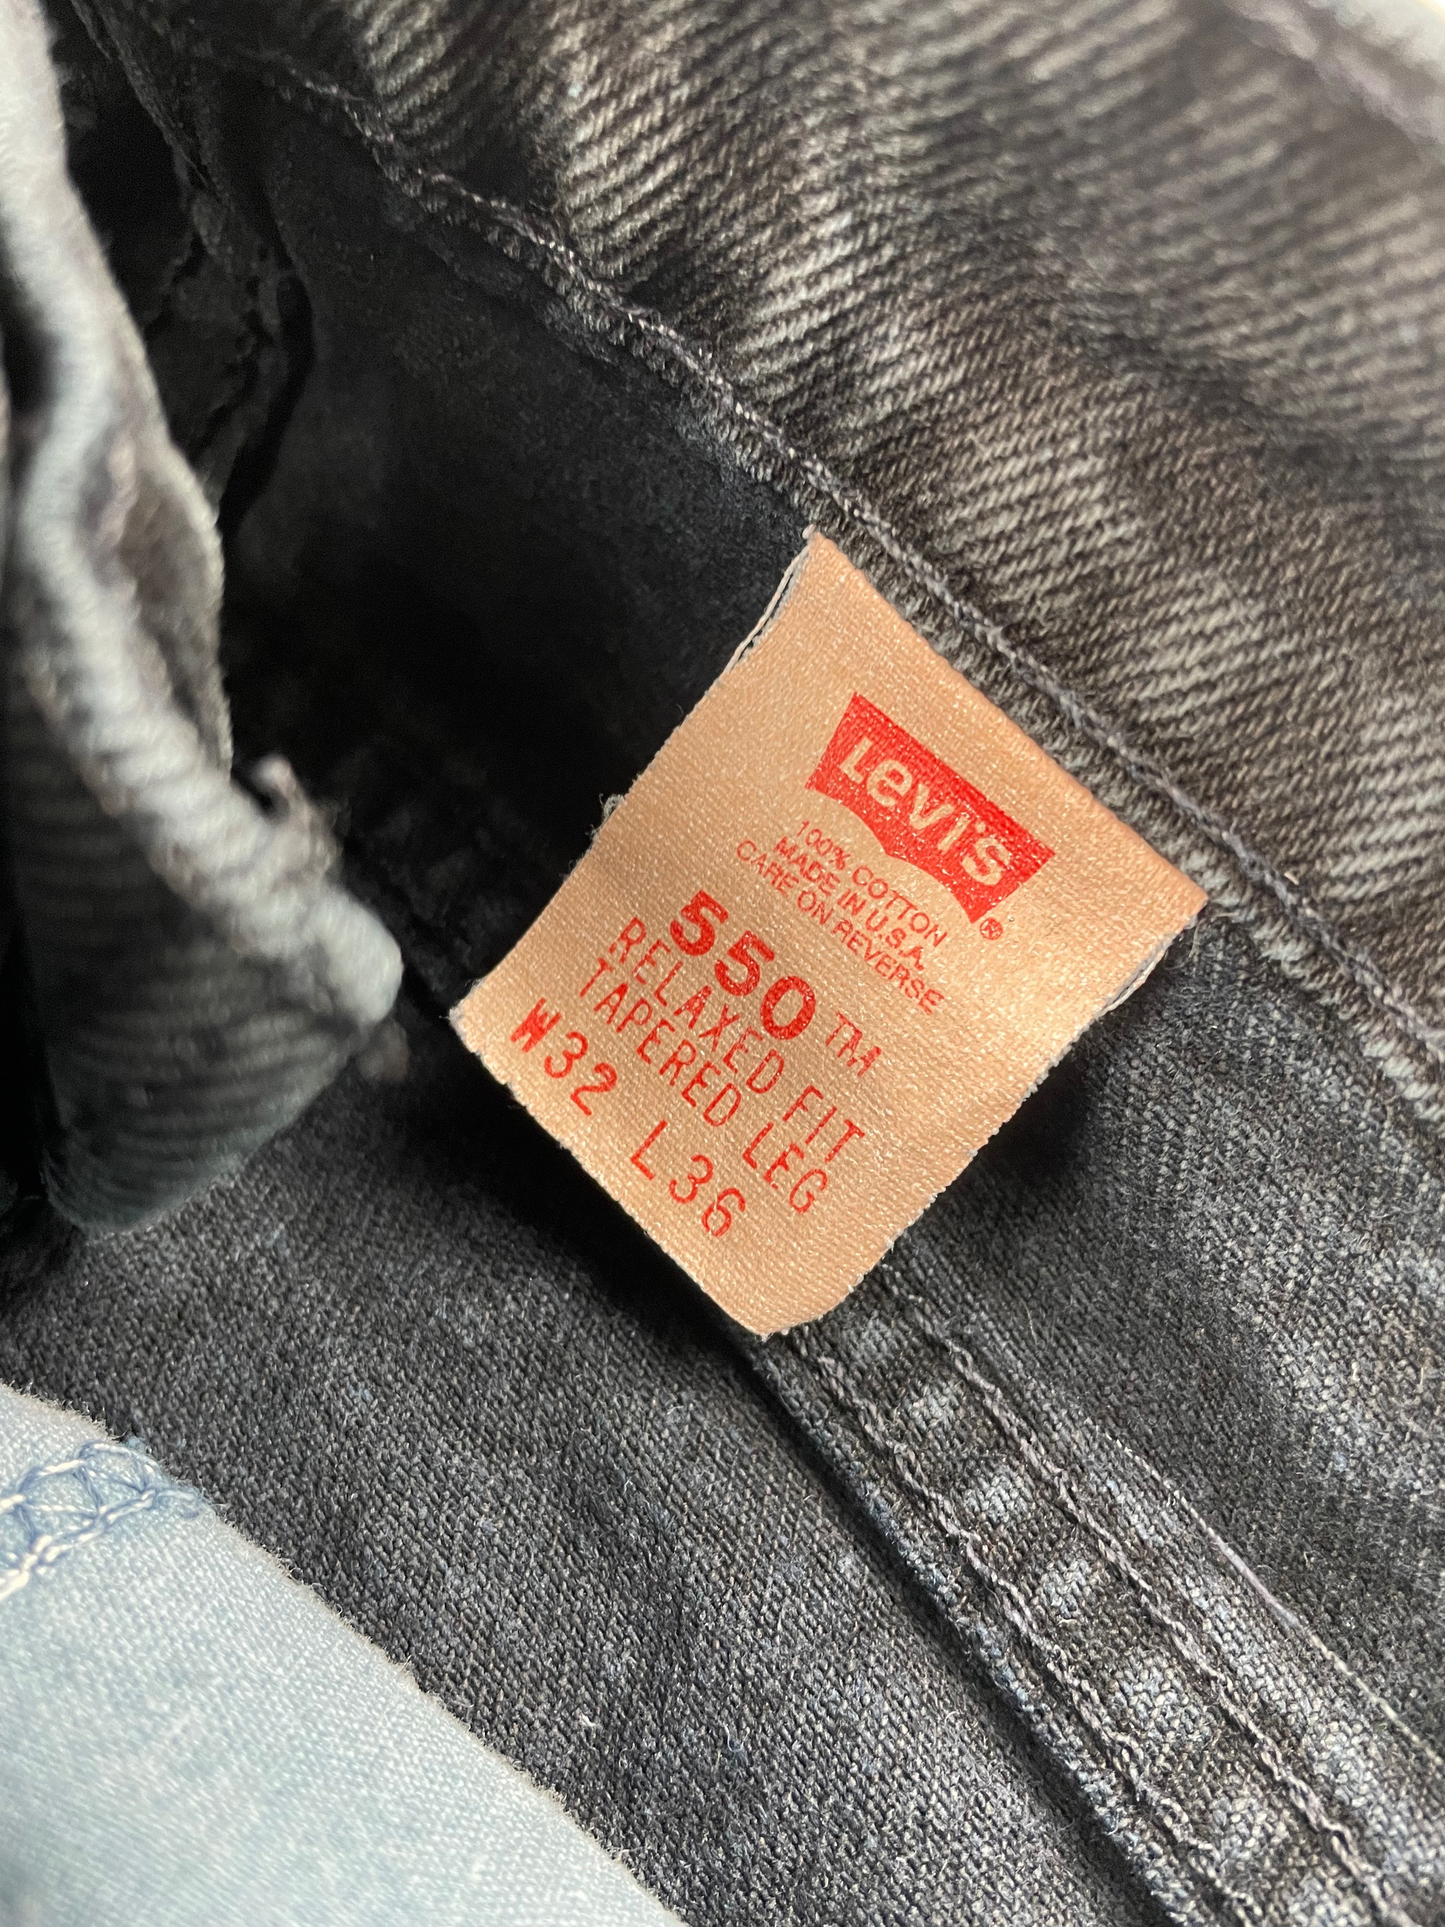 Vintage MADE IN USA Levis 550 Jeans